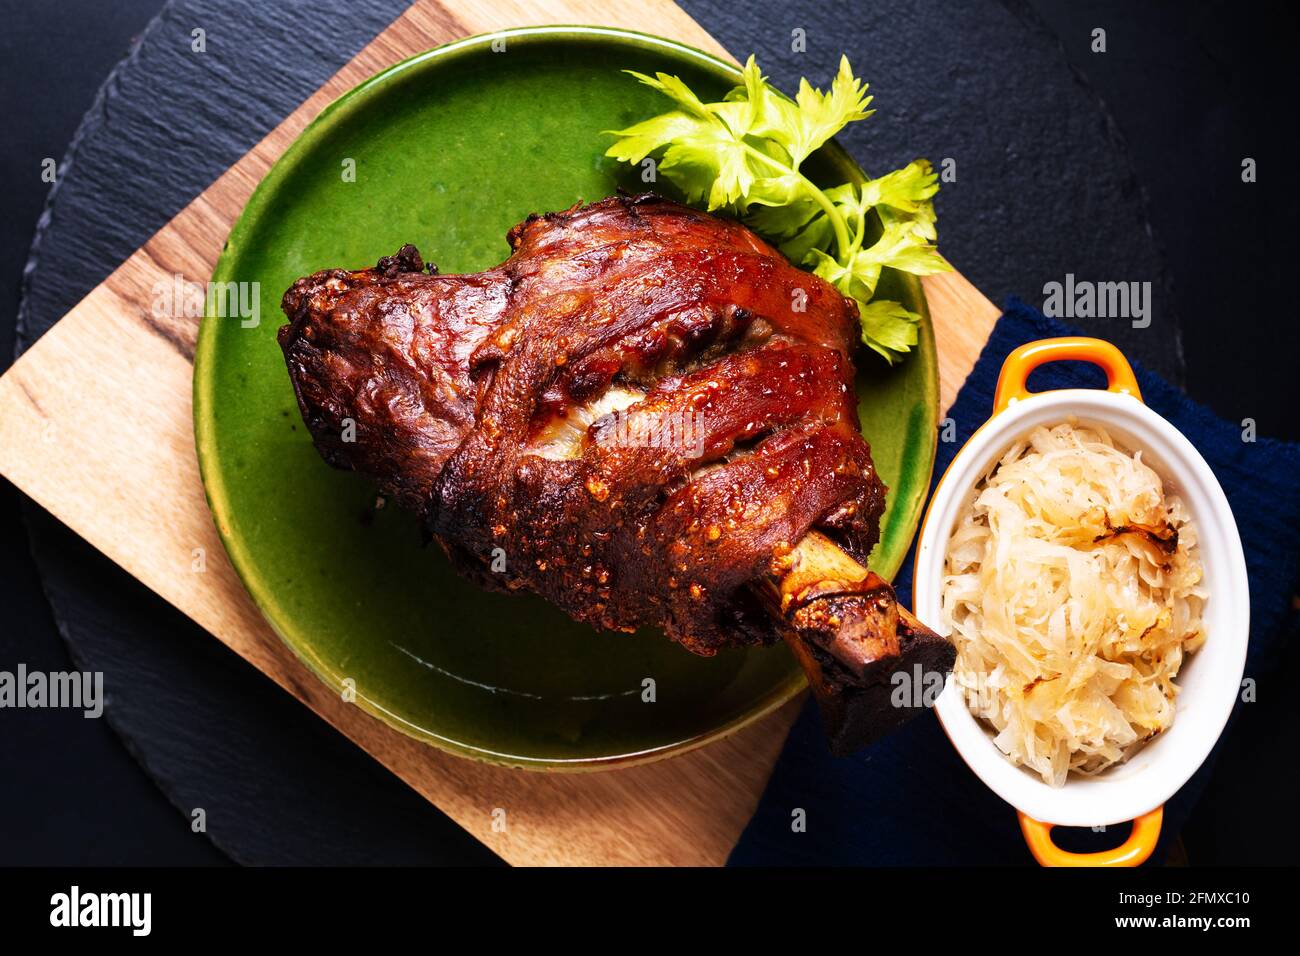 Food concept German pork hock or pork knuckle with sauerkraut cabbage pickle on wooden board with copy space Stock Photo